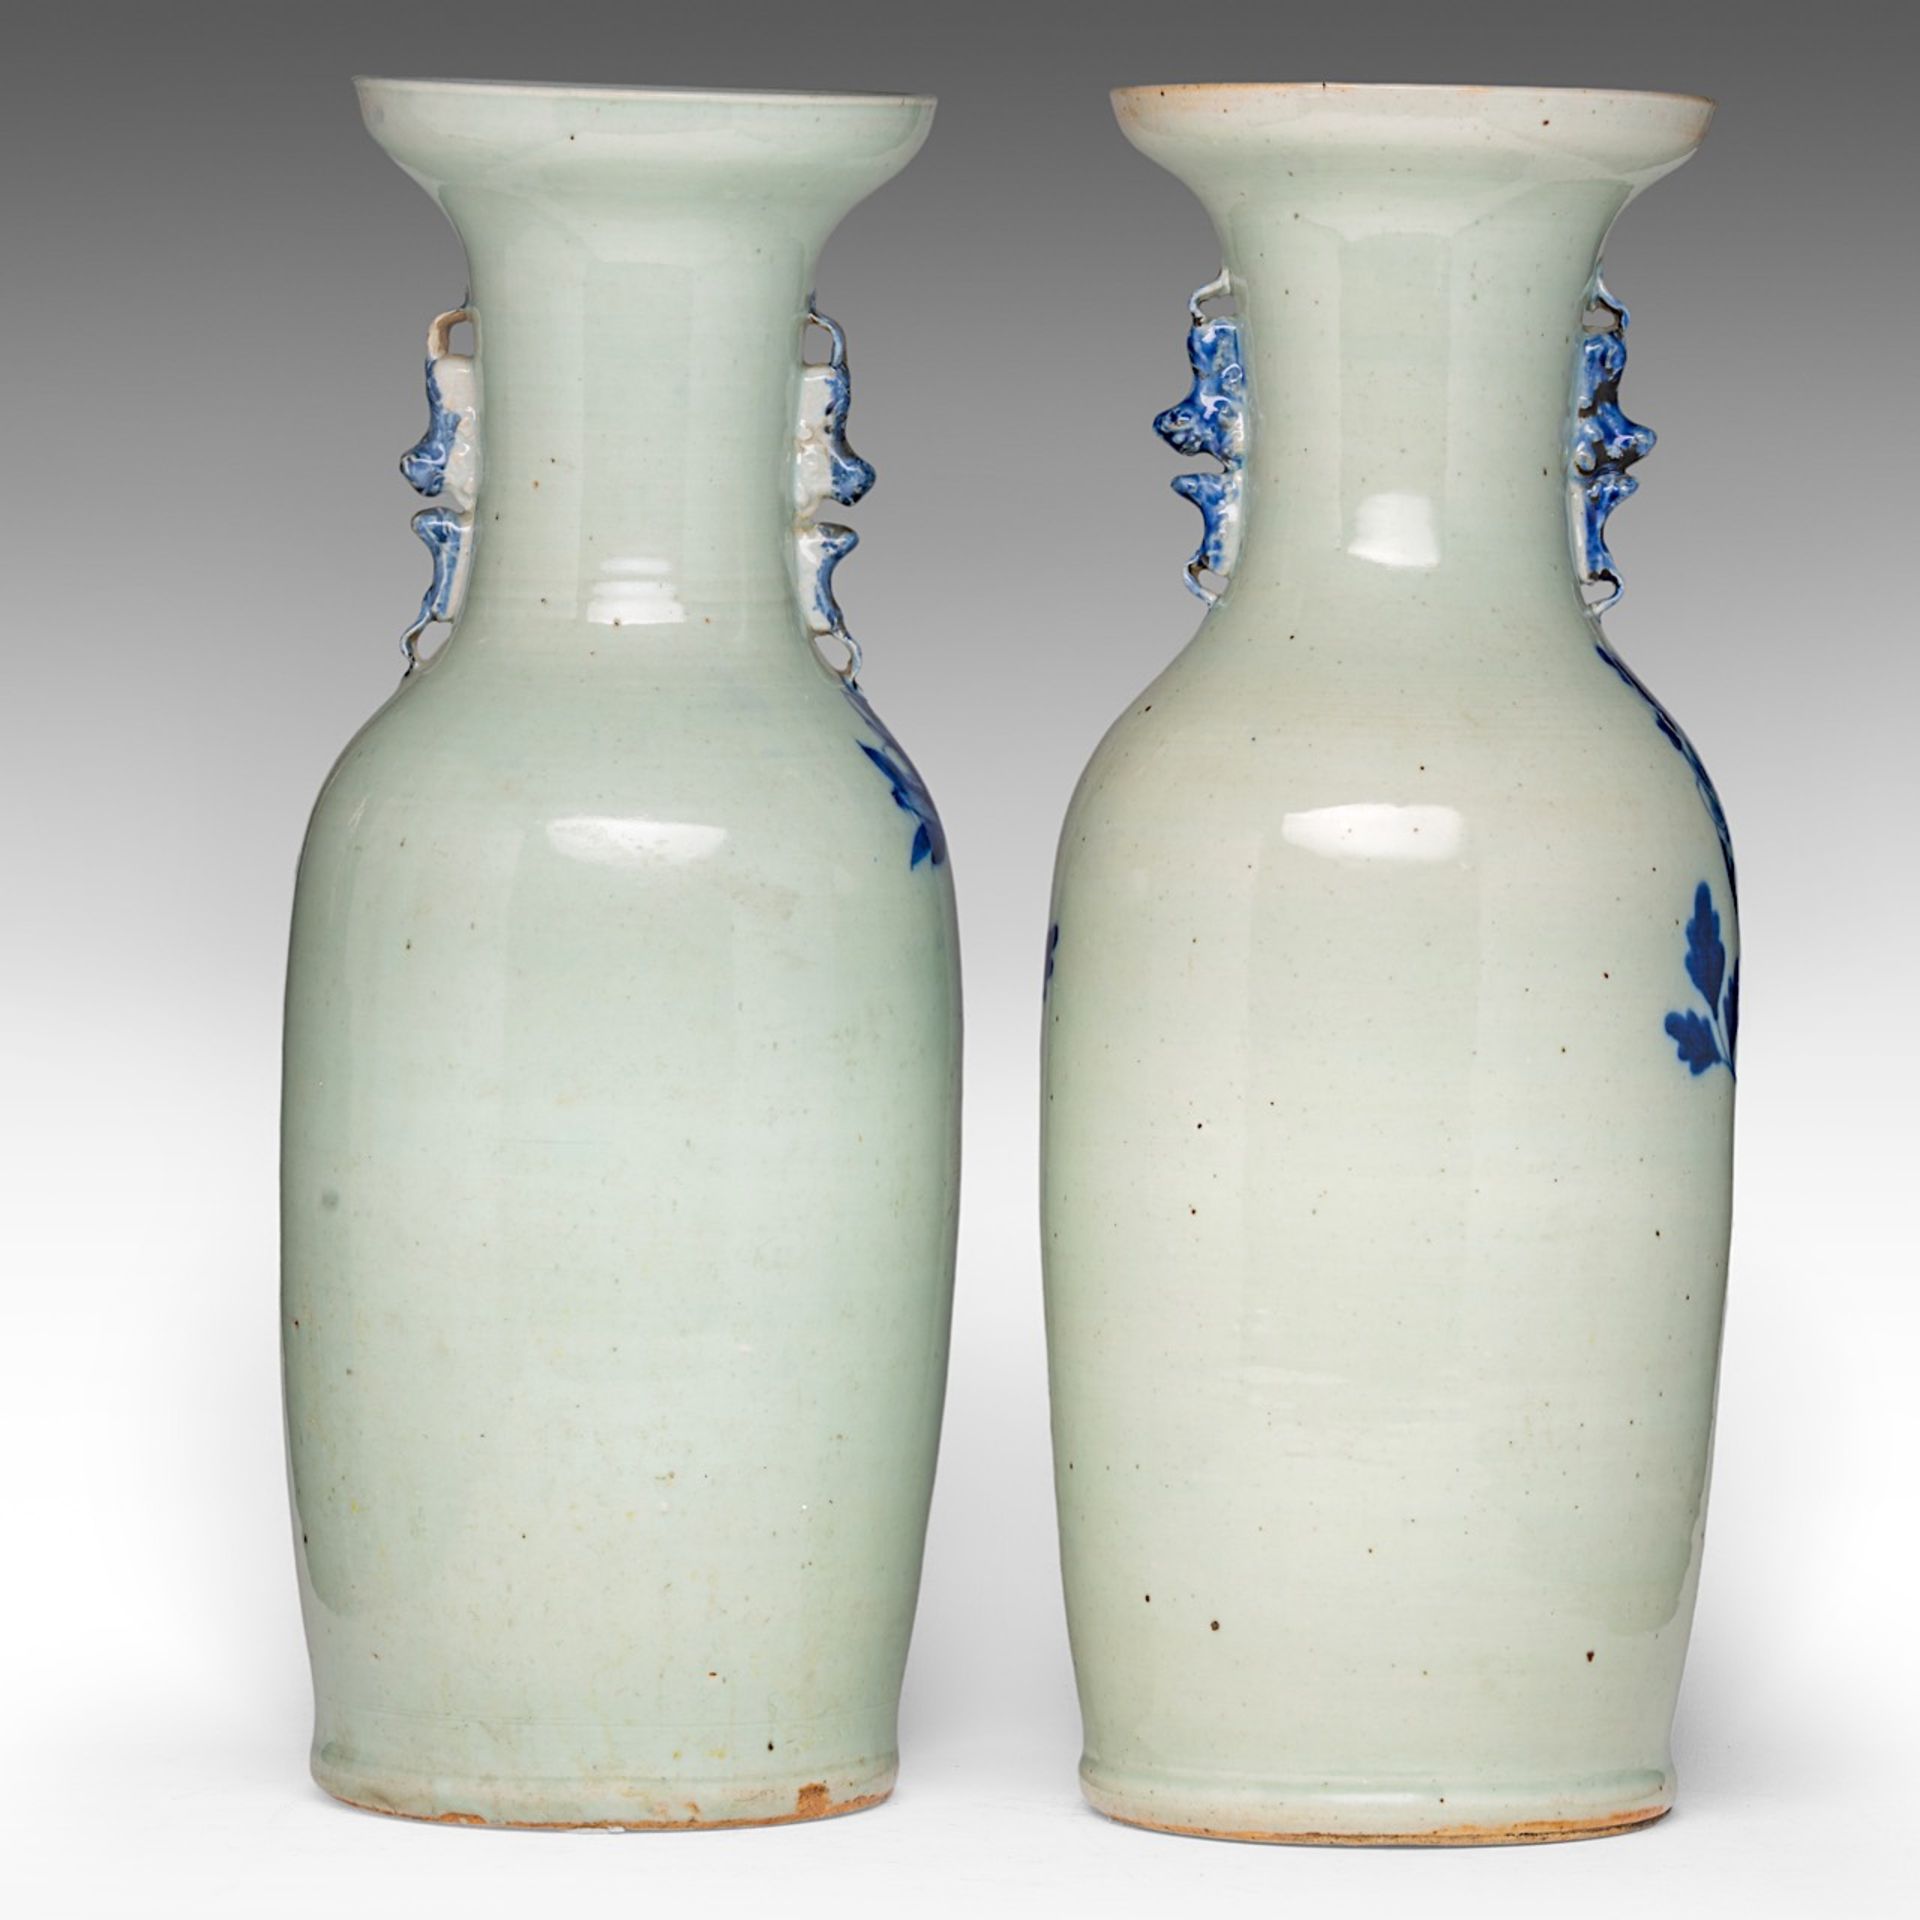 Four Chinese blue and white on celadon ground 'Flowers and birds' vases, late 19thC, H 57 - 58 cm - Image 4 of 13